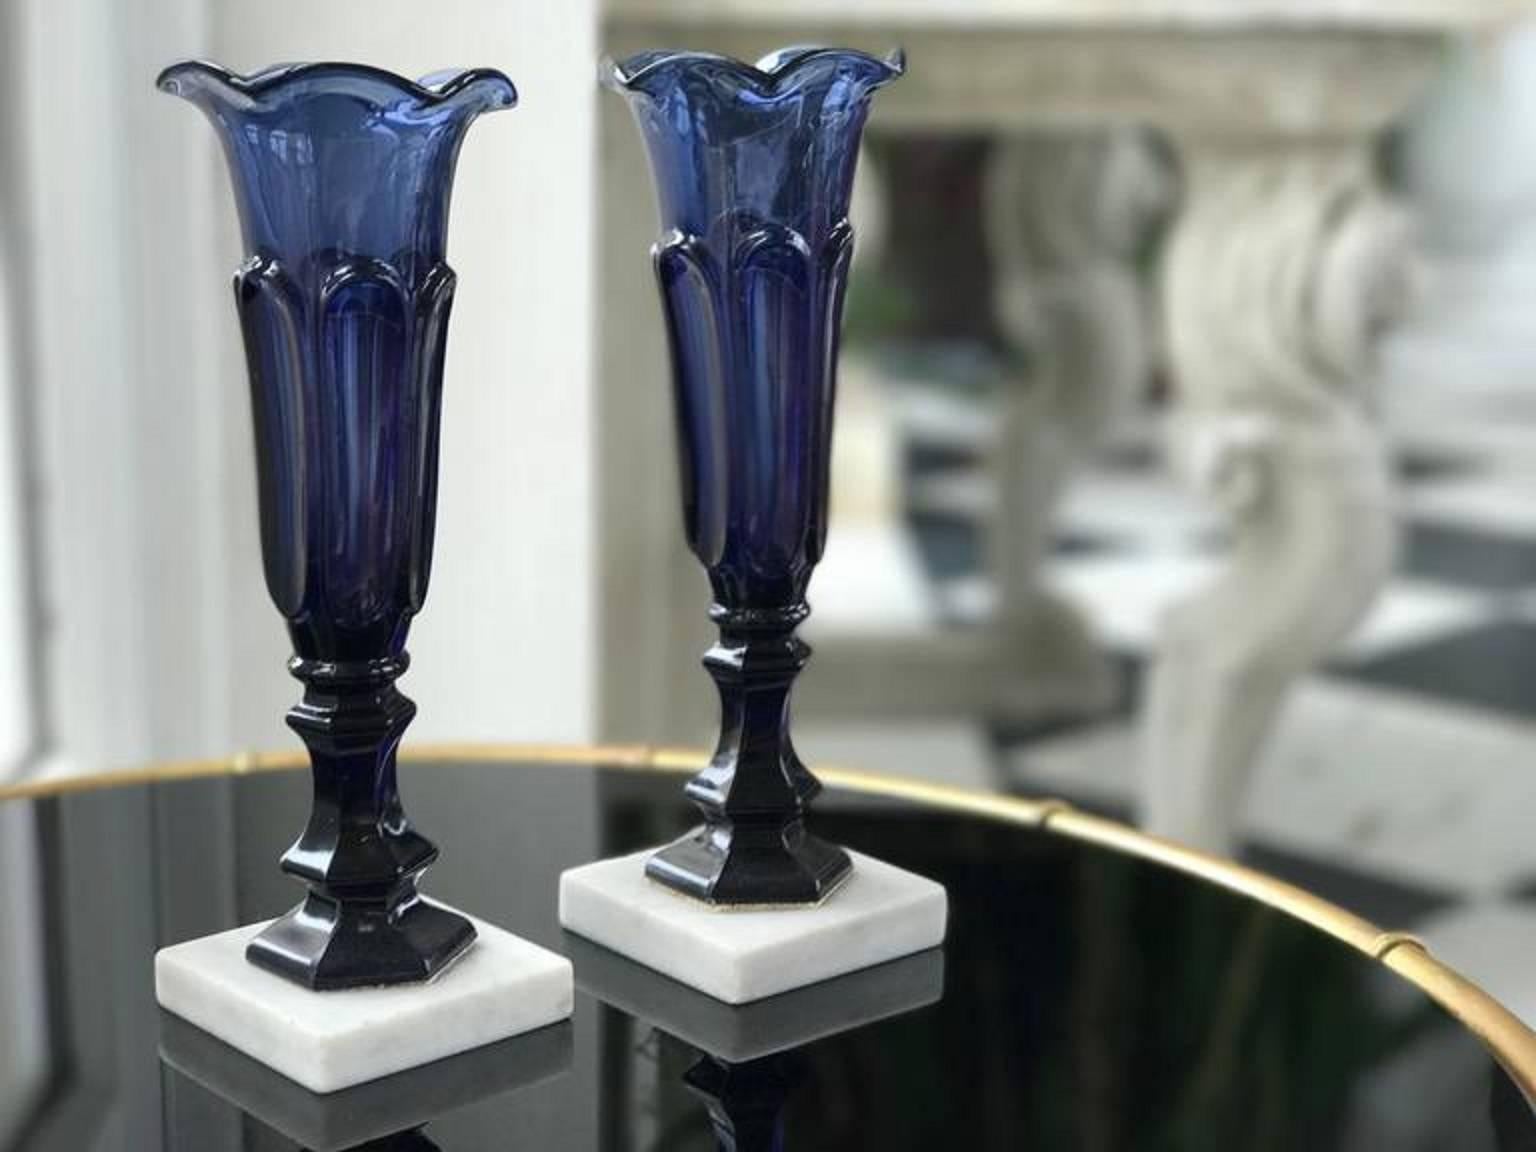 This electric blue pair of Boston sandwich glass vases is beyond stunning. These sandwich glass vases are in remarkable good condition for their age and are in the exceedingly rare electric blue color.
Made in MA by the Boston Sandwich Glass